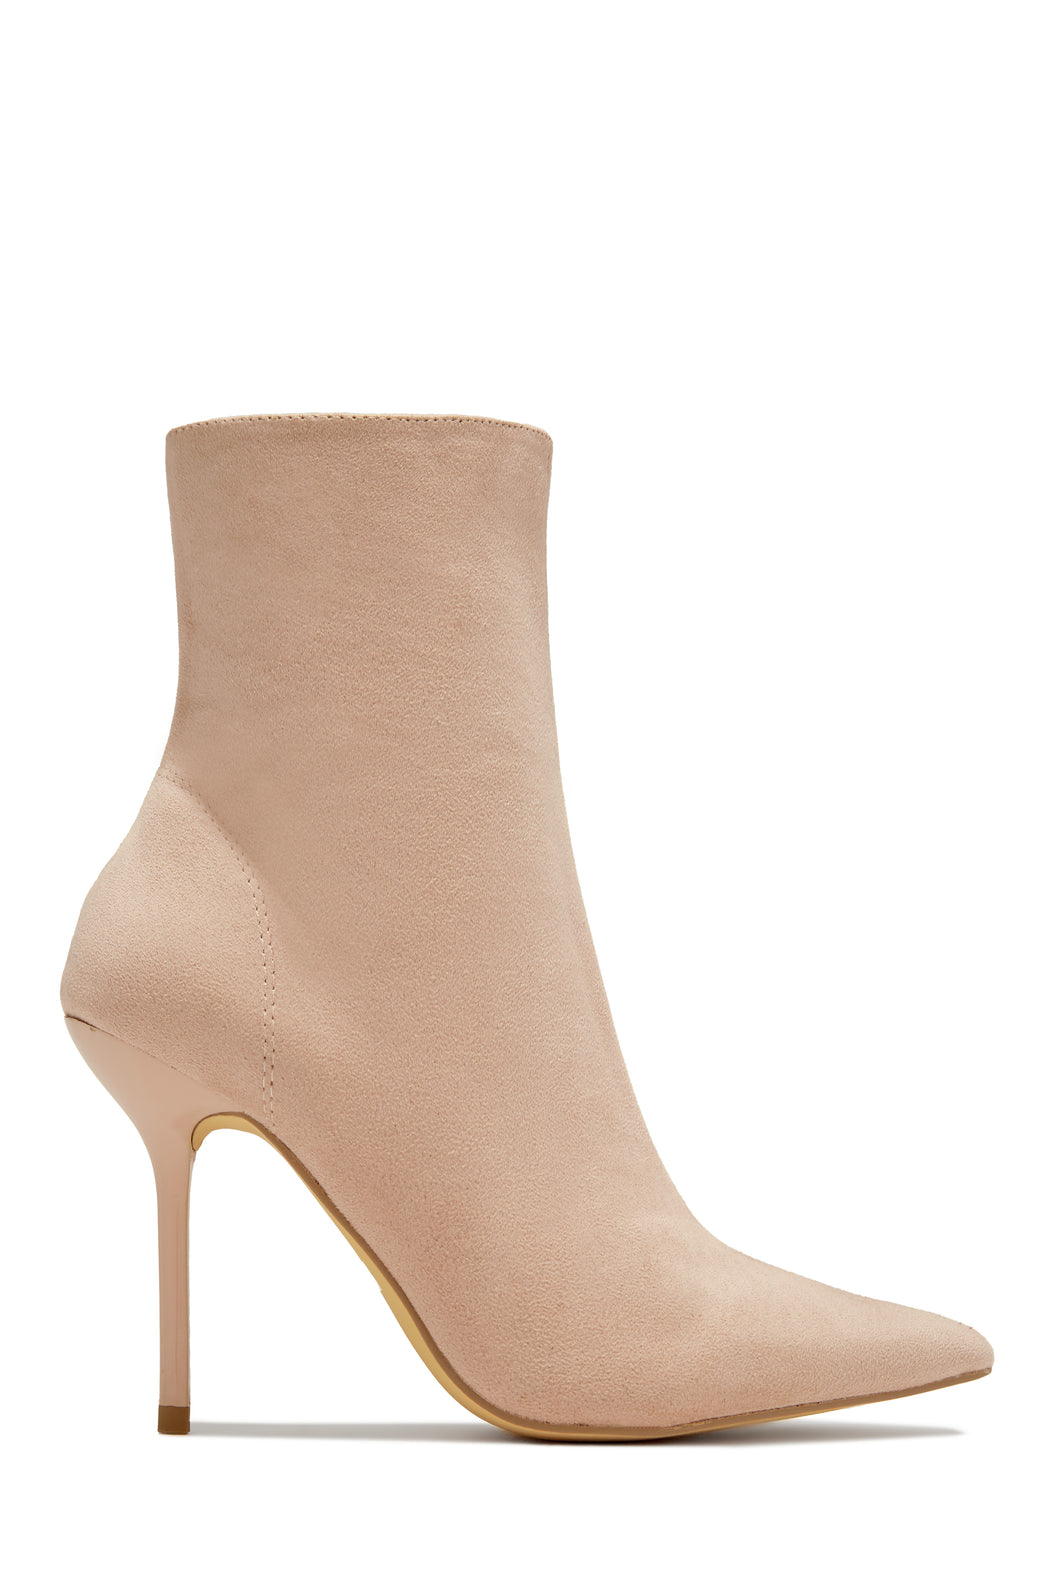 Last Night Pointed Toe High Heel Ankle Boots - Nude